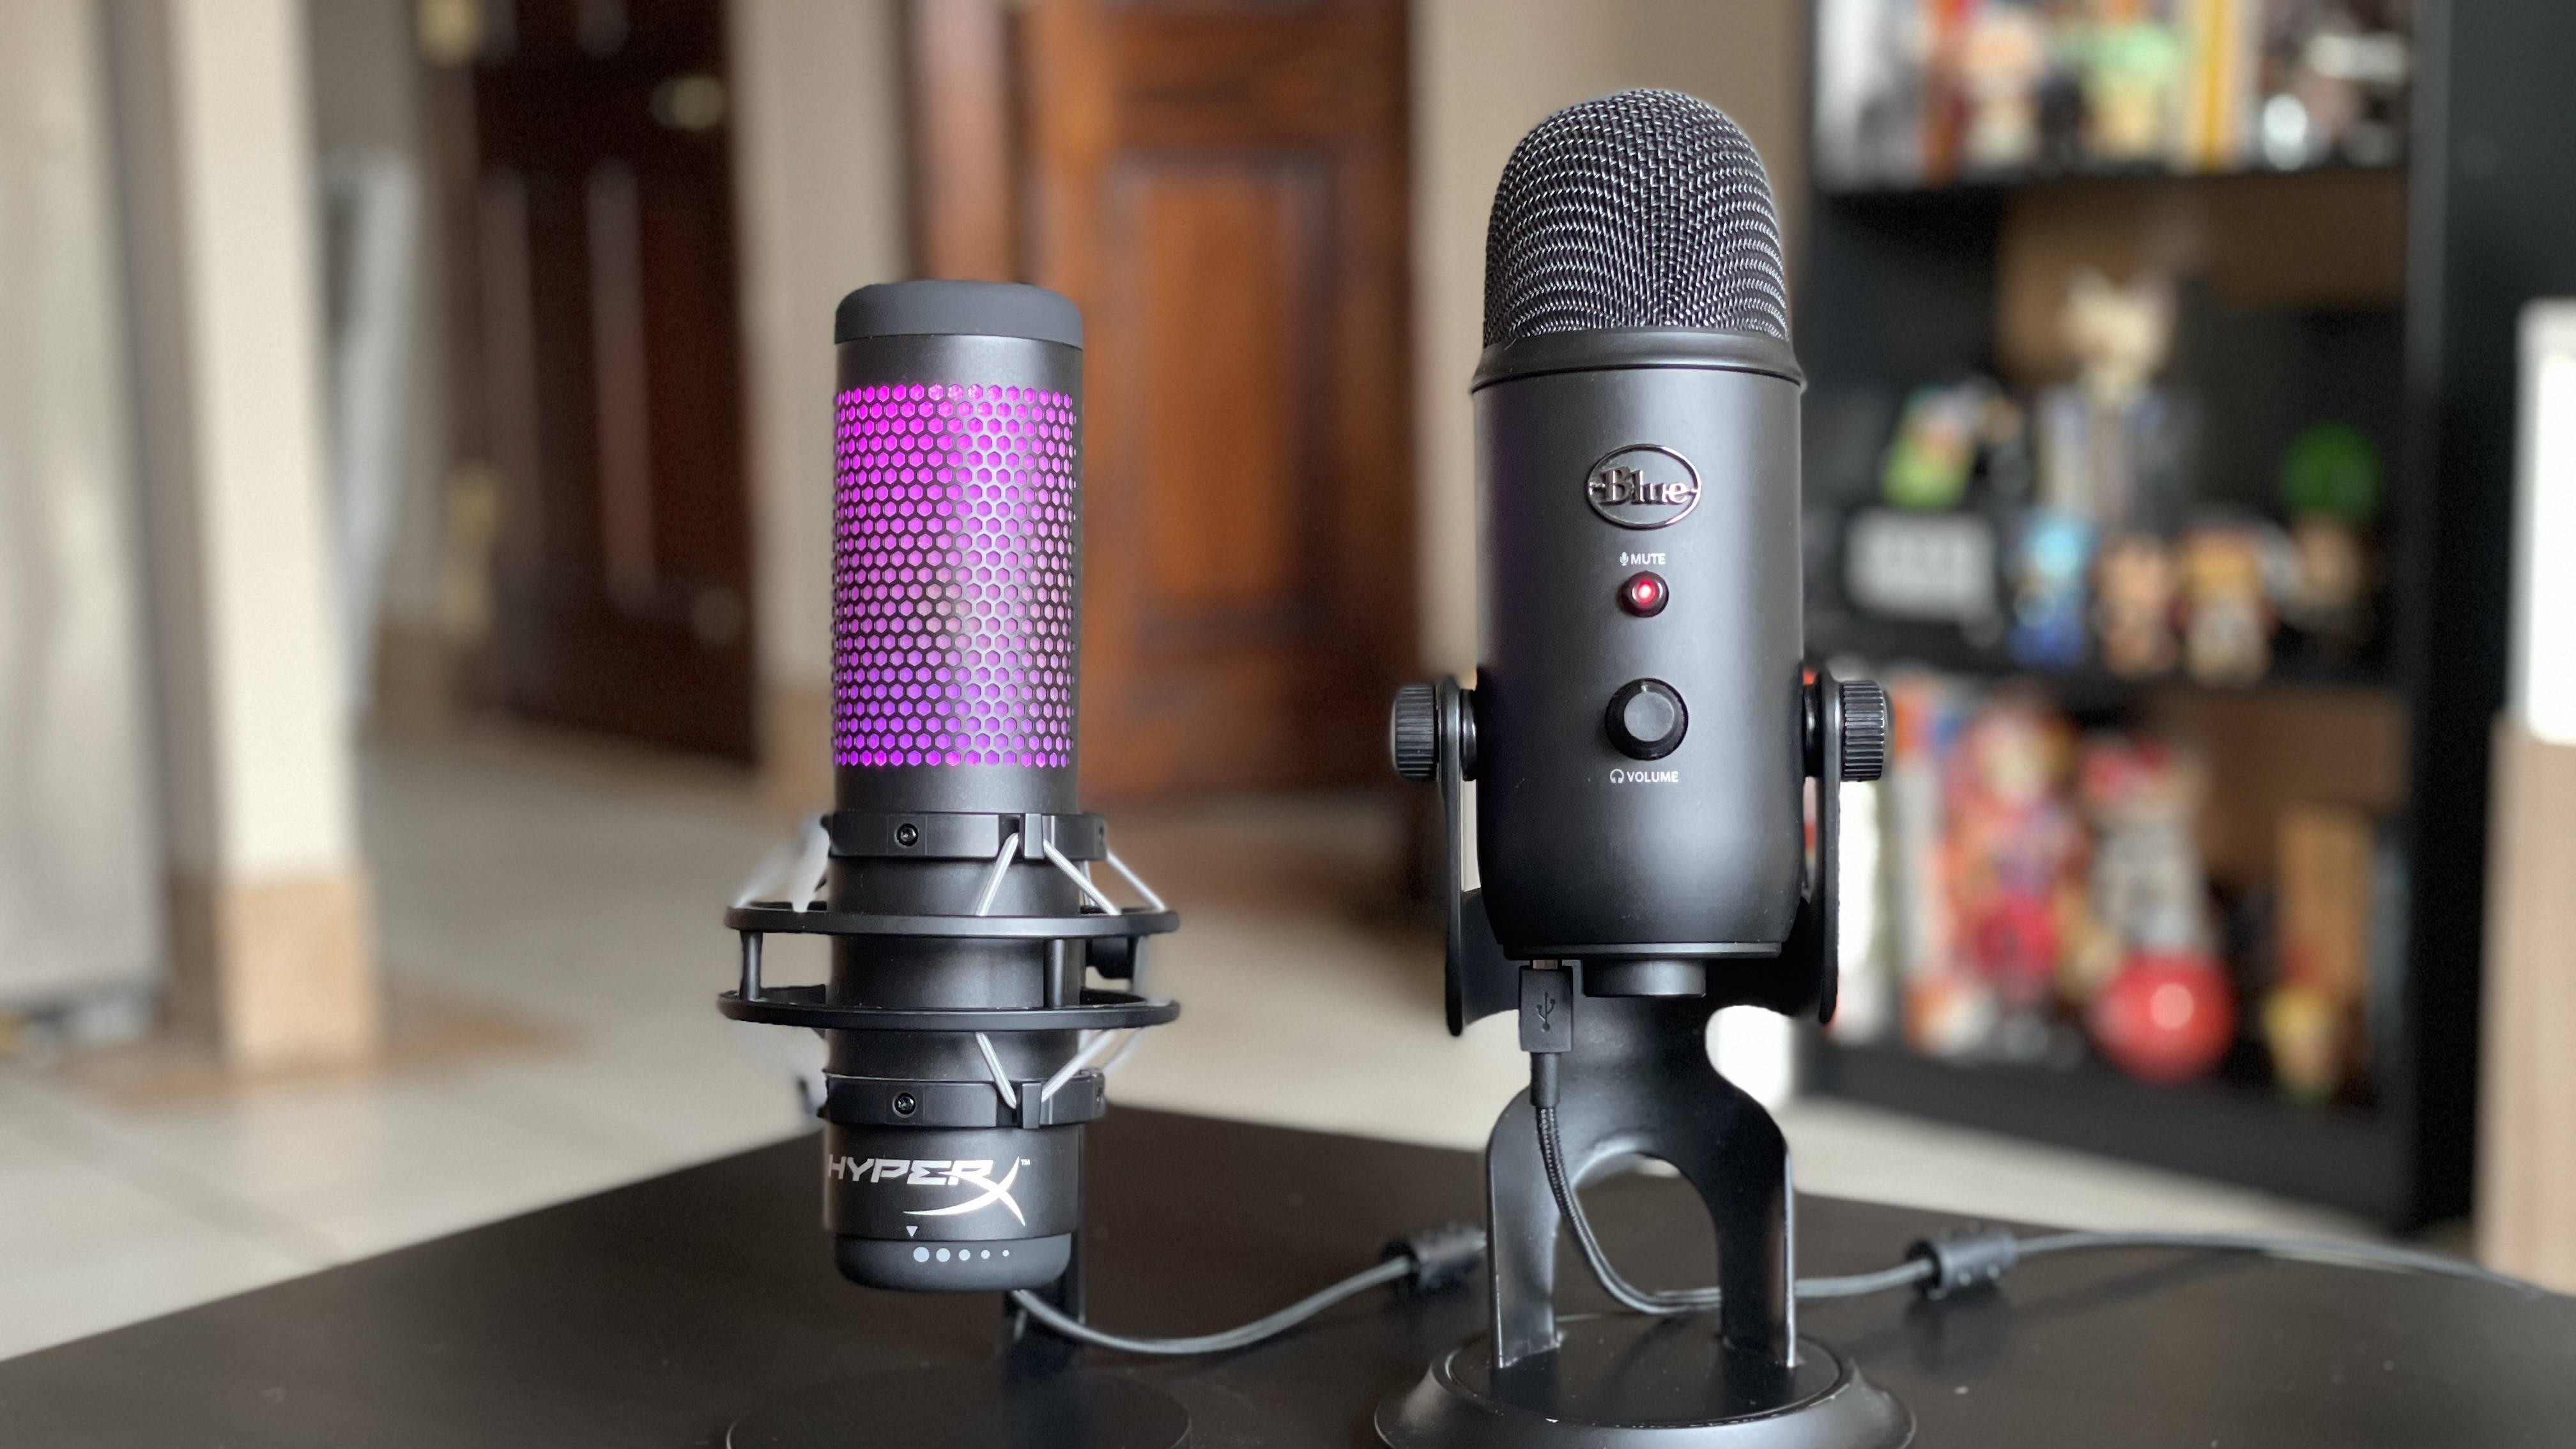 Blue Yeti X Review / Test (with Blue Yeti Comparison) 